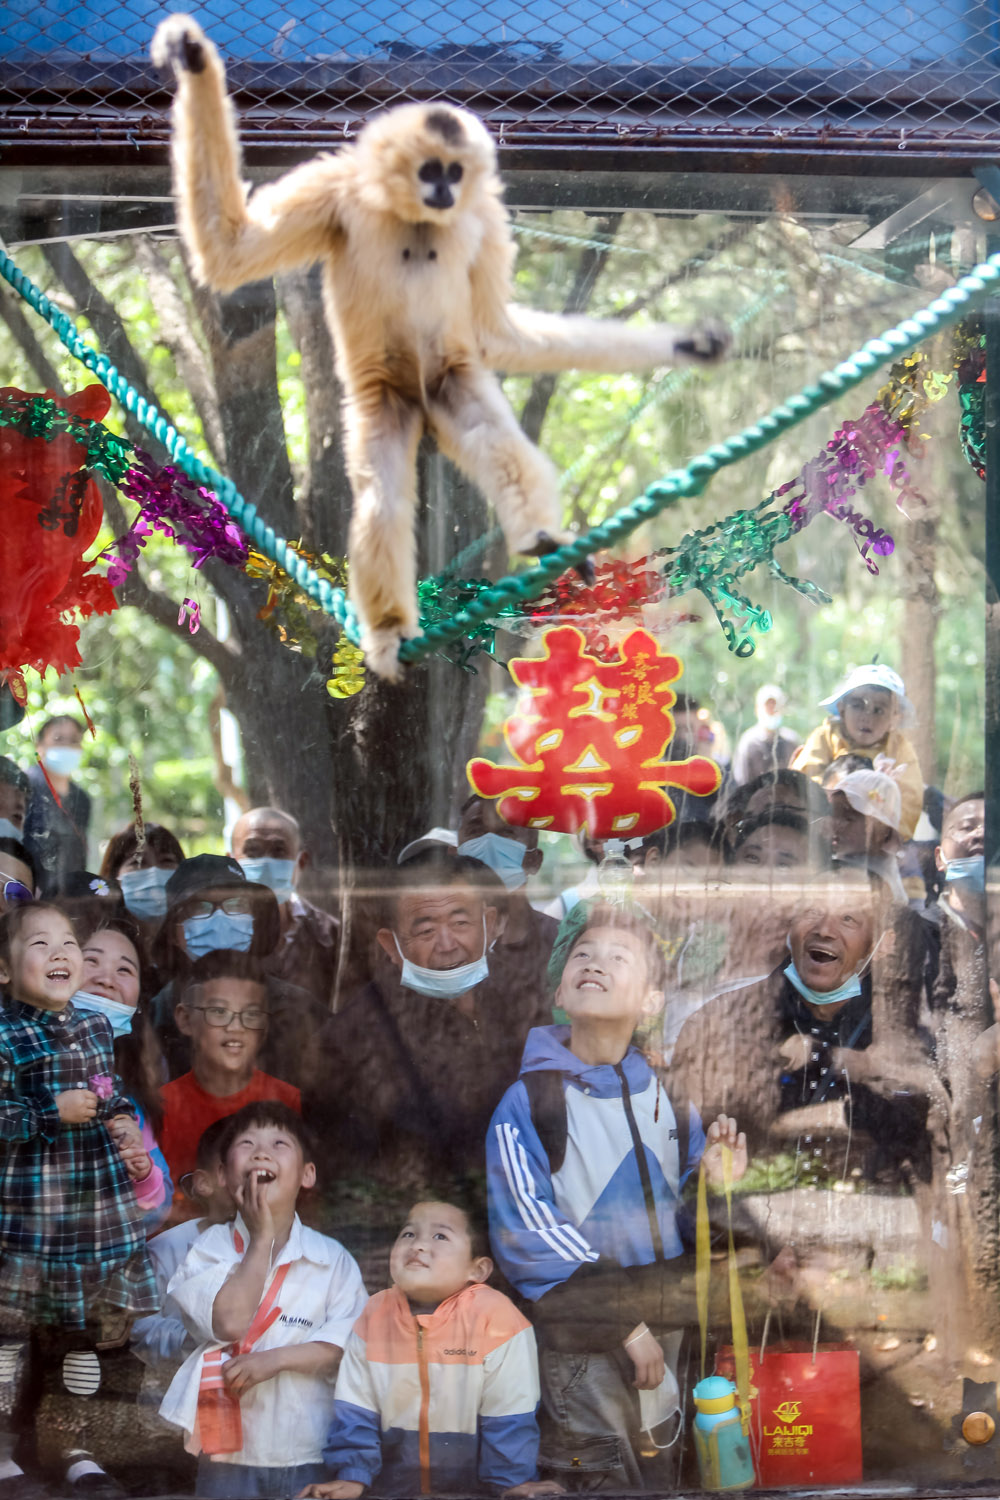 Families look at a gibbon in a zoo in Jinan, Shandong province, May 2, 2021. The zoo’s staff reportedly held a “wedding” for two of the gibbons. People Visual